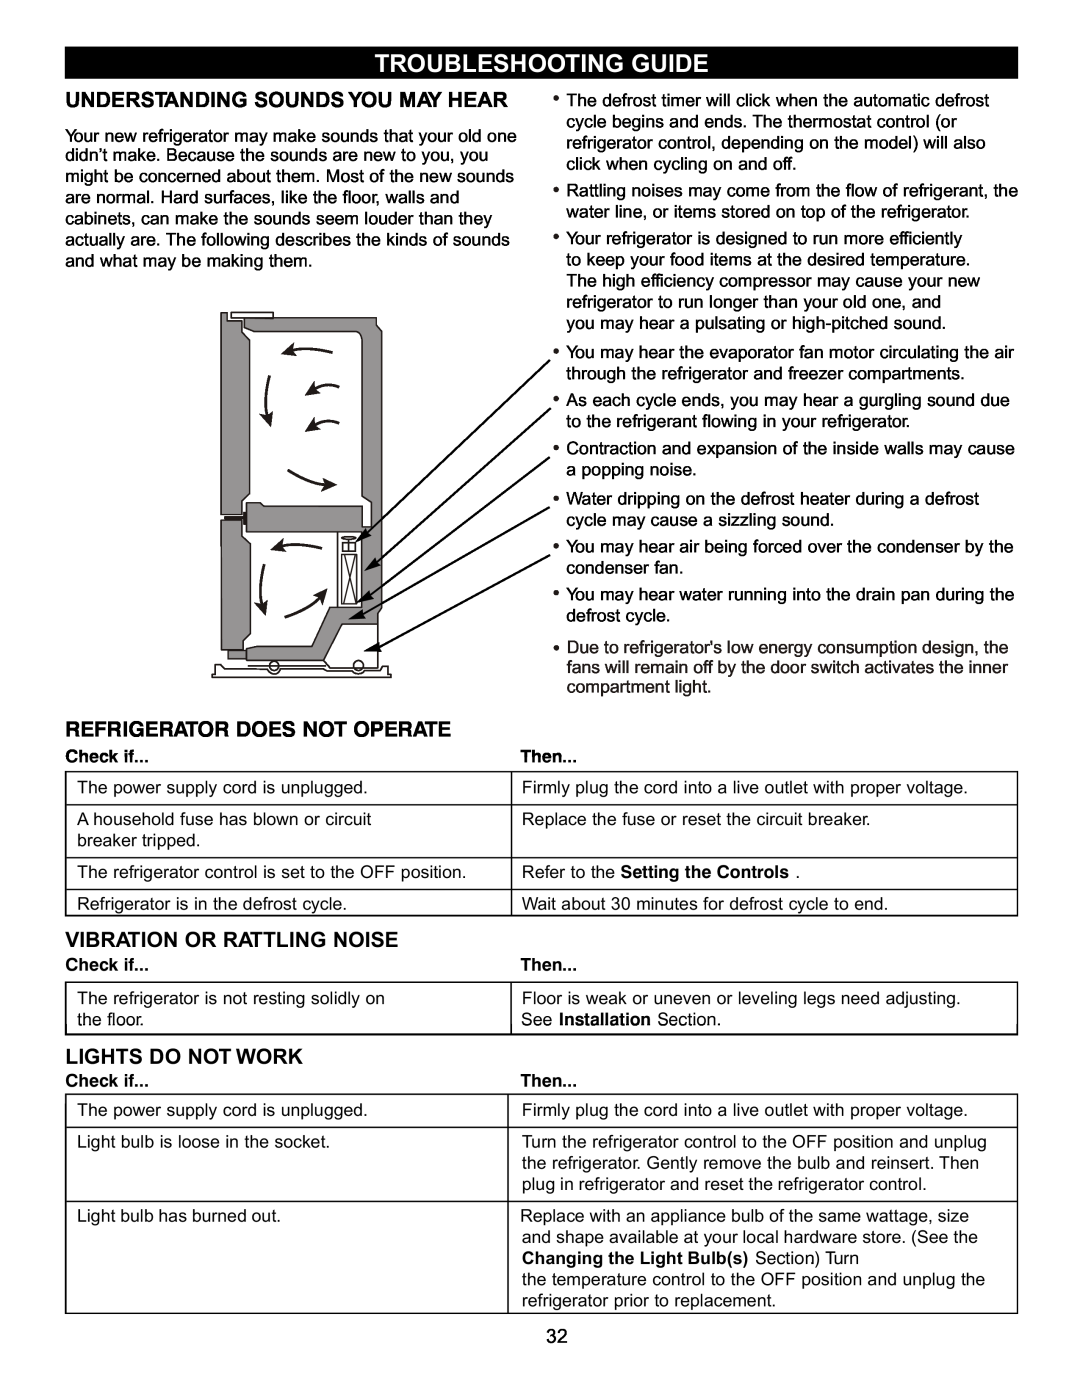 LG Electronics LBC2252 Troubleshooting Guide, Understanding Sounds You May Hear, Refrigerator Does Not Operate, Check if 